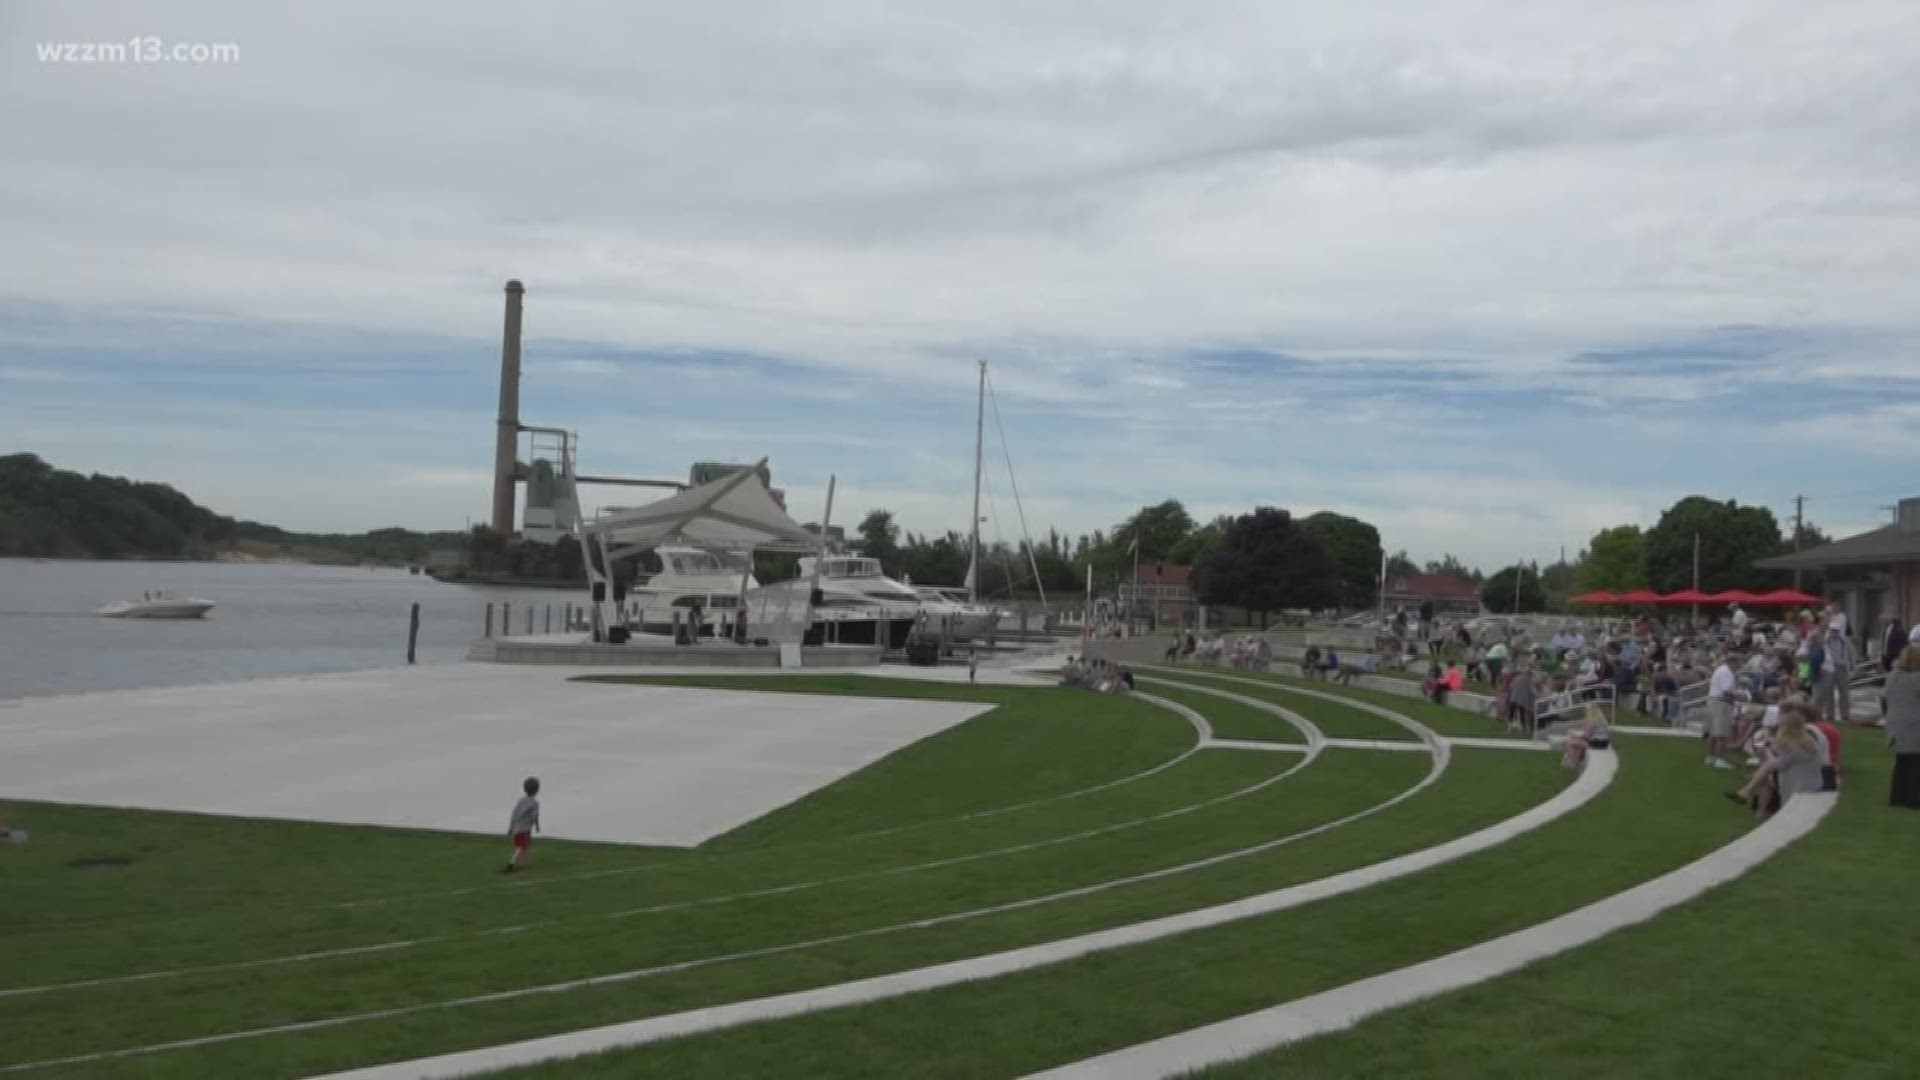 Grand Haven Waterfront stadium re-opens